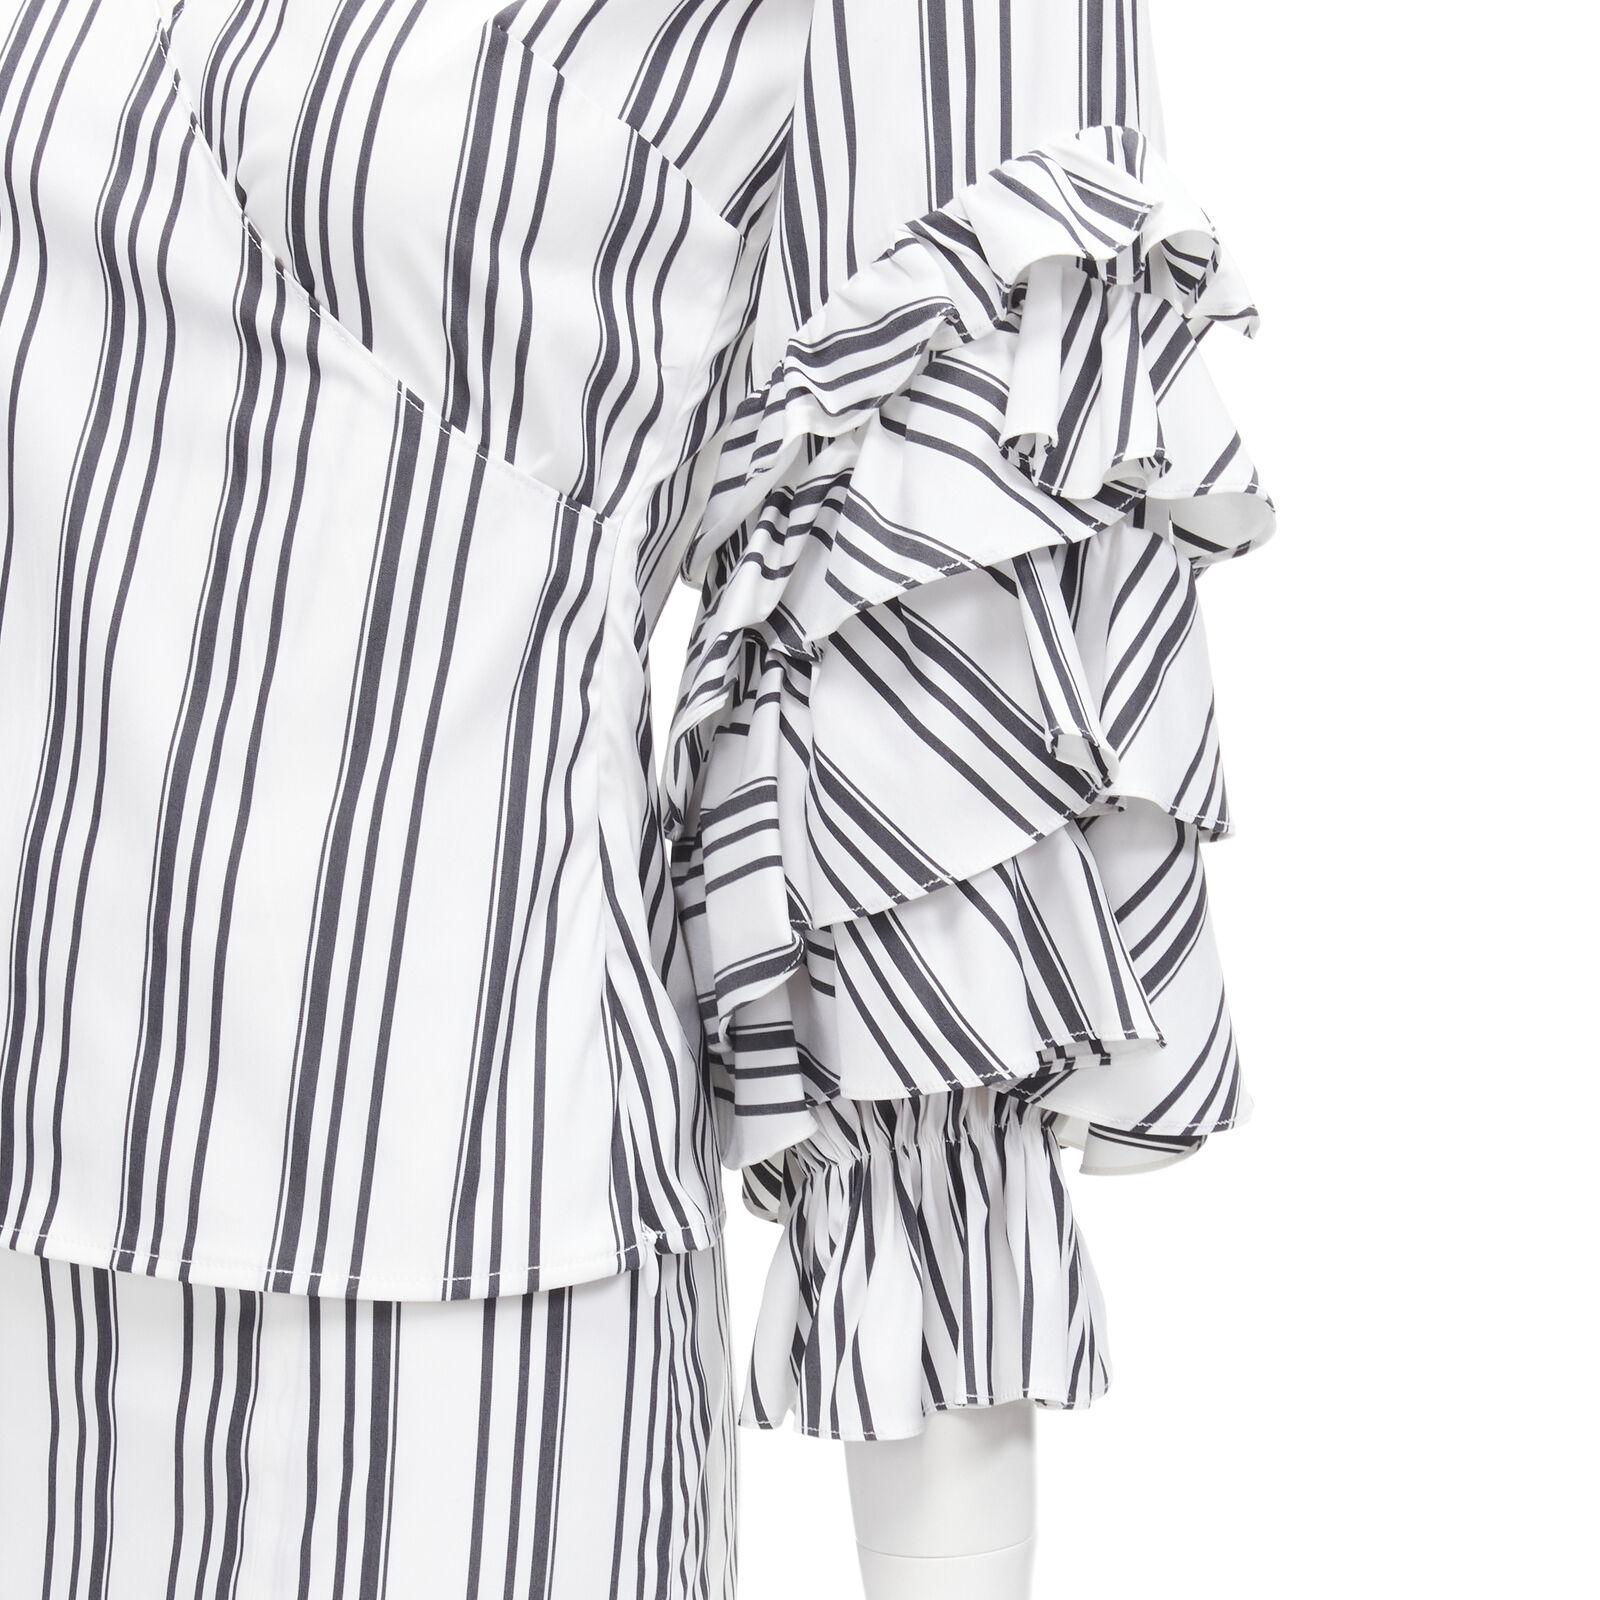 CAROLINE CONSTAS black white ruffled stripes wrap top high low skirt set XS
Reference: AAWC/A00425
Brand: Caroline Constas
Material: Cotton, Blend
Color: White, Black
Pattern: Striped
Closure: Zip
Extra Details: Side zip detsil.
Made in: United